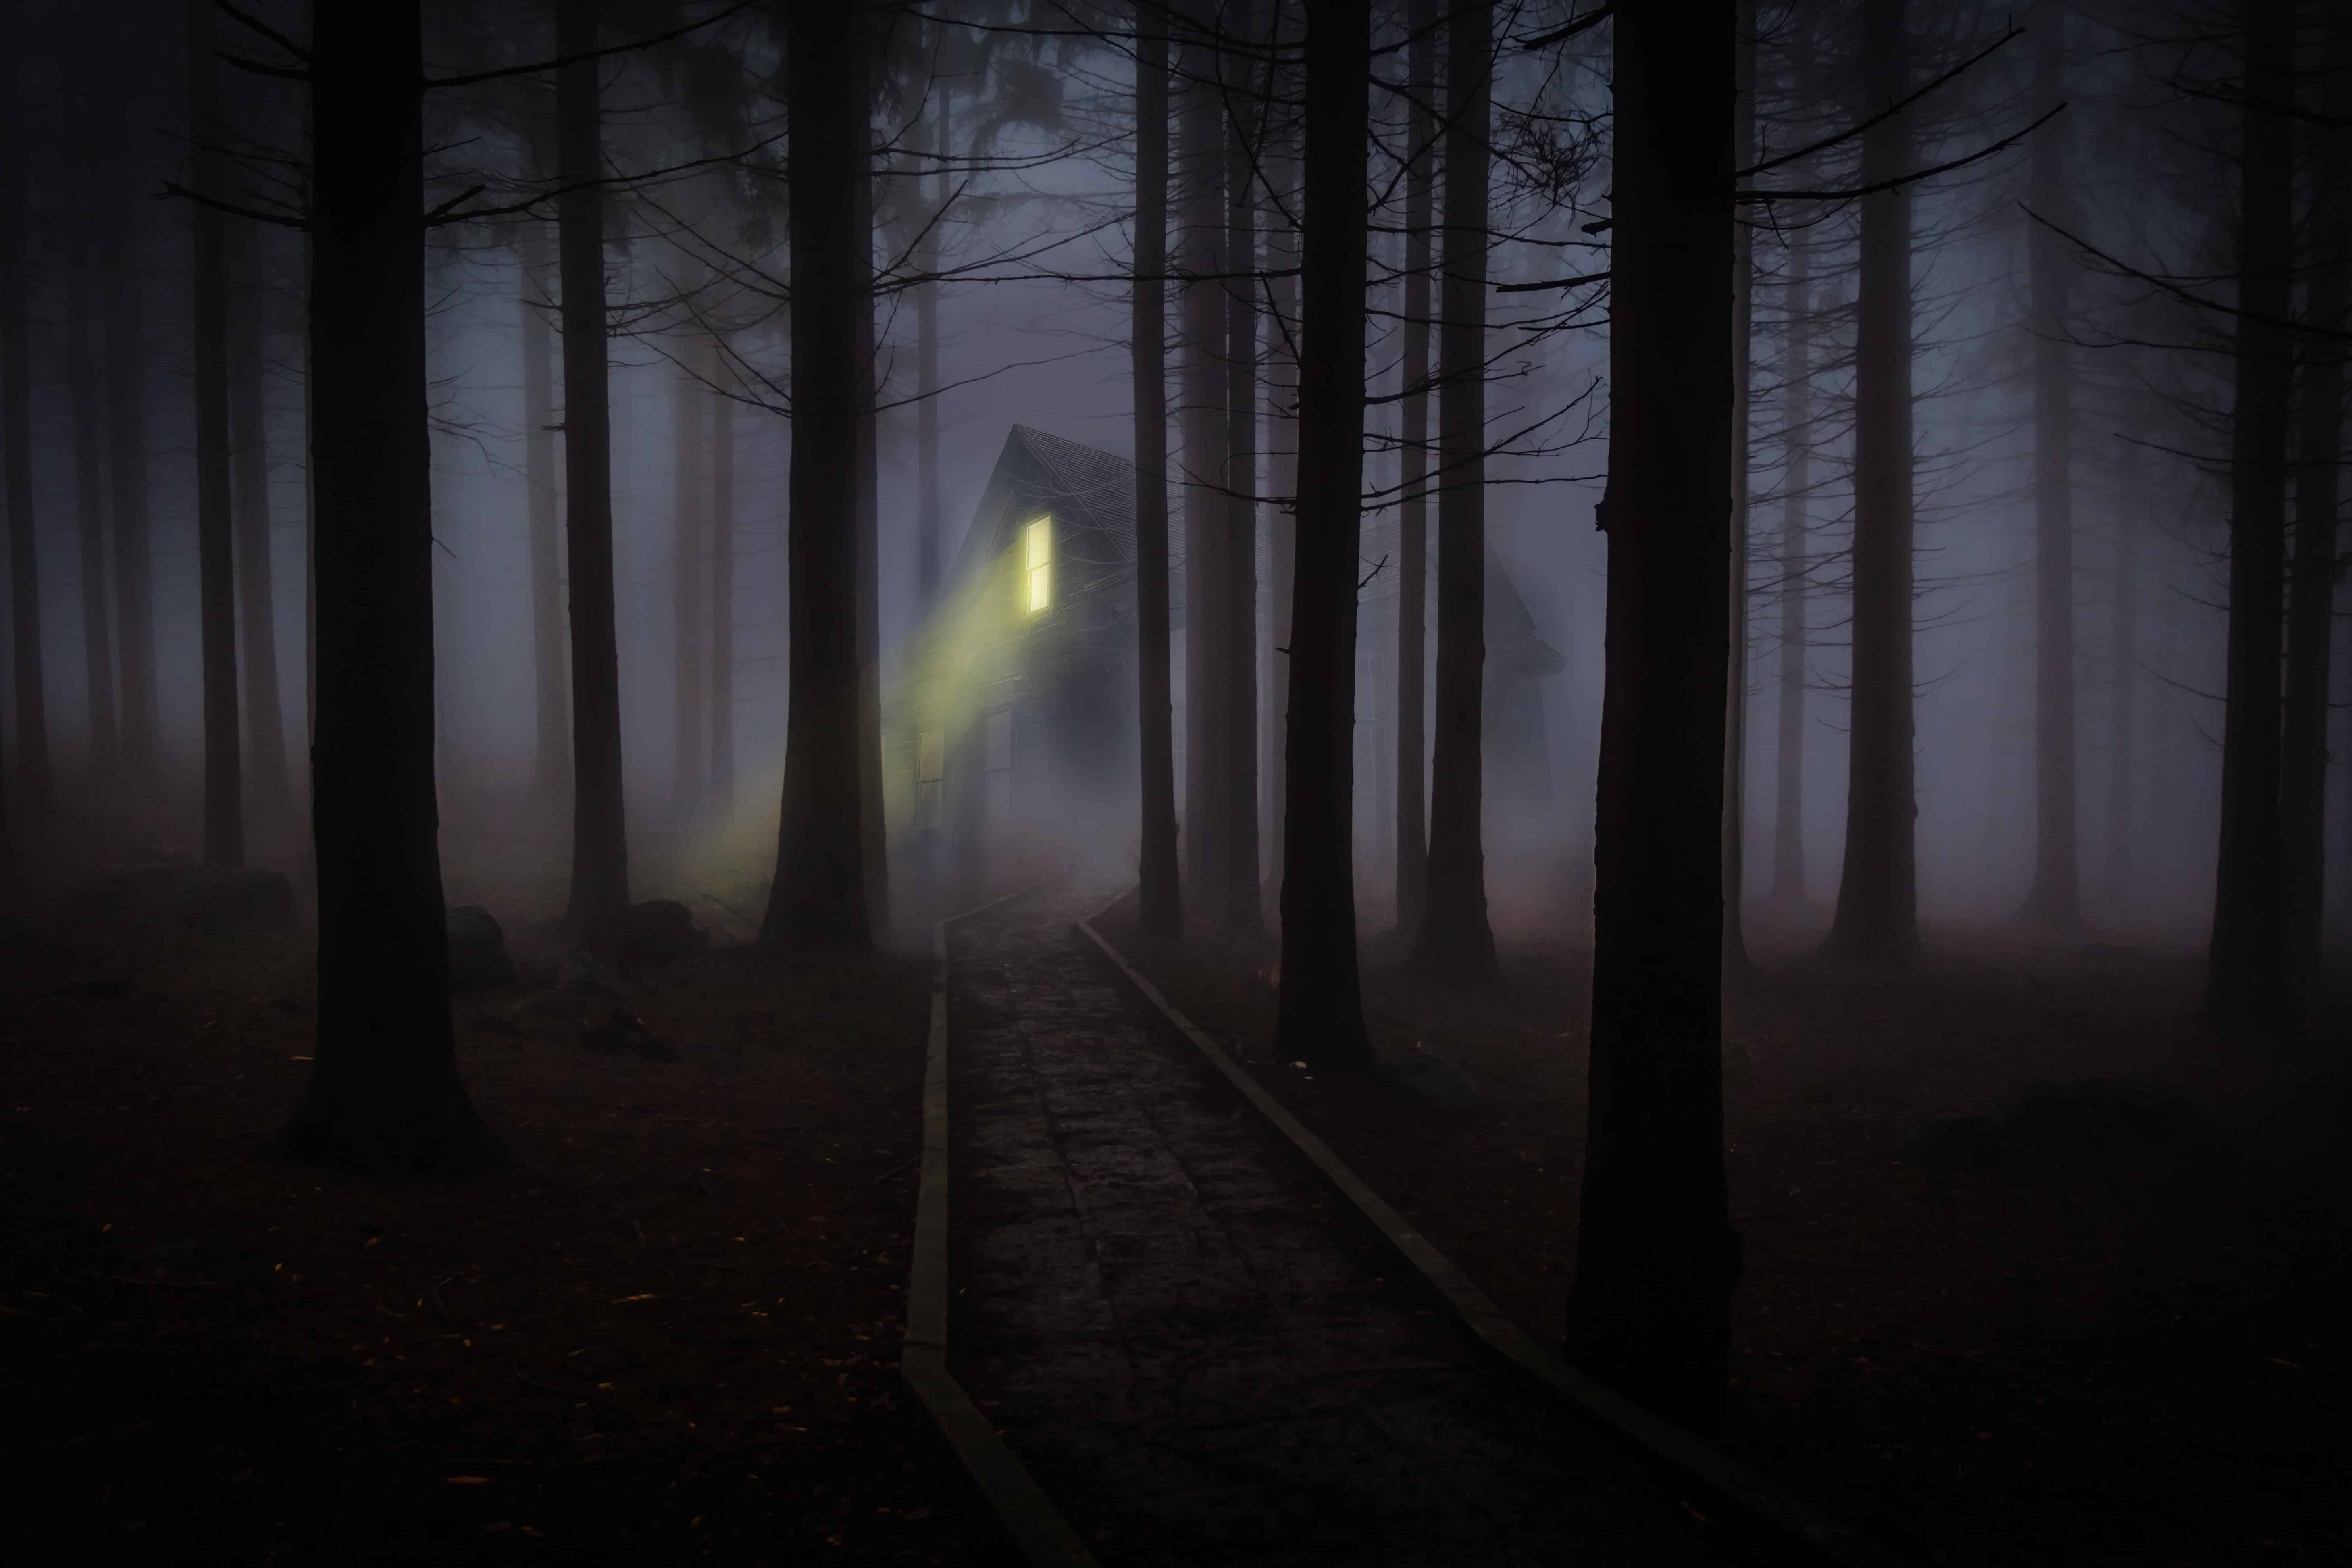 Let’s take you through a tunnel of horror stories: Bengaluru and ghosts go together!